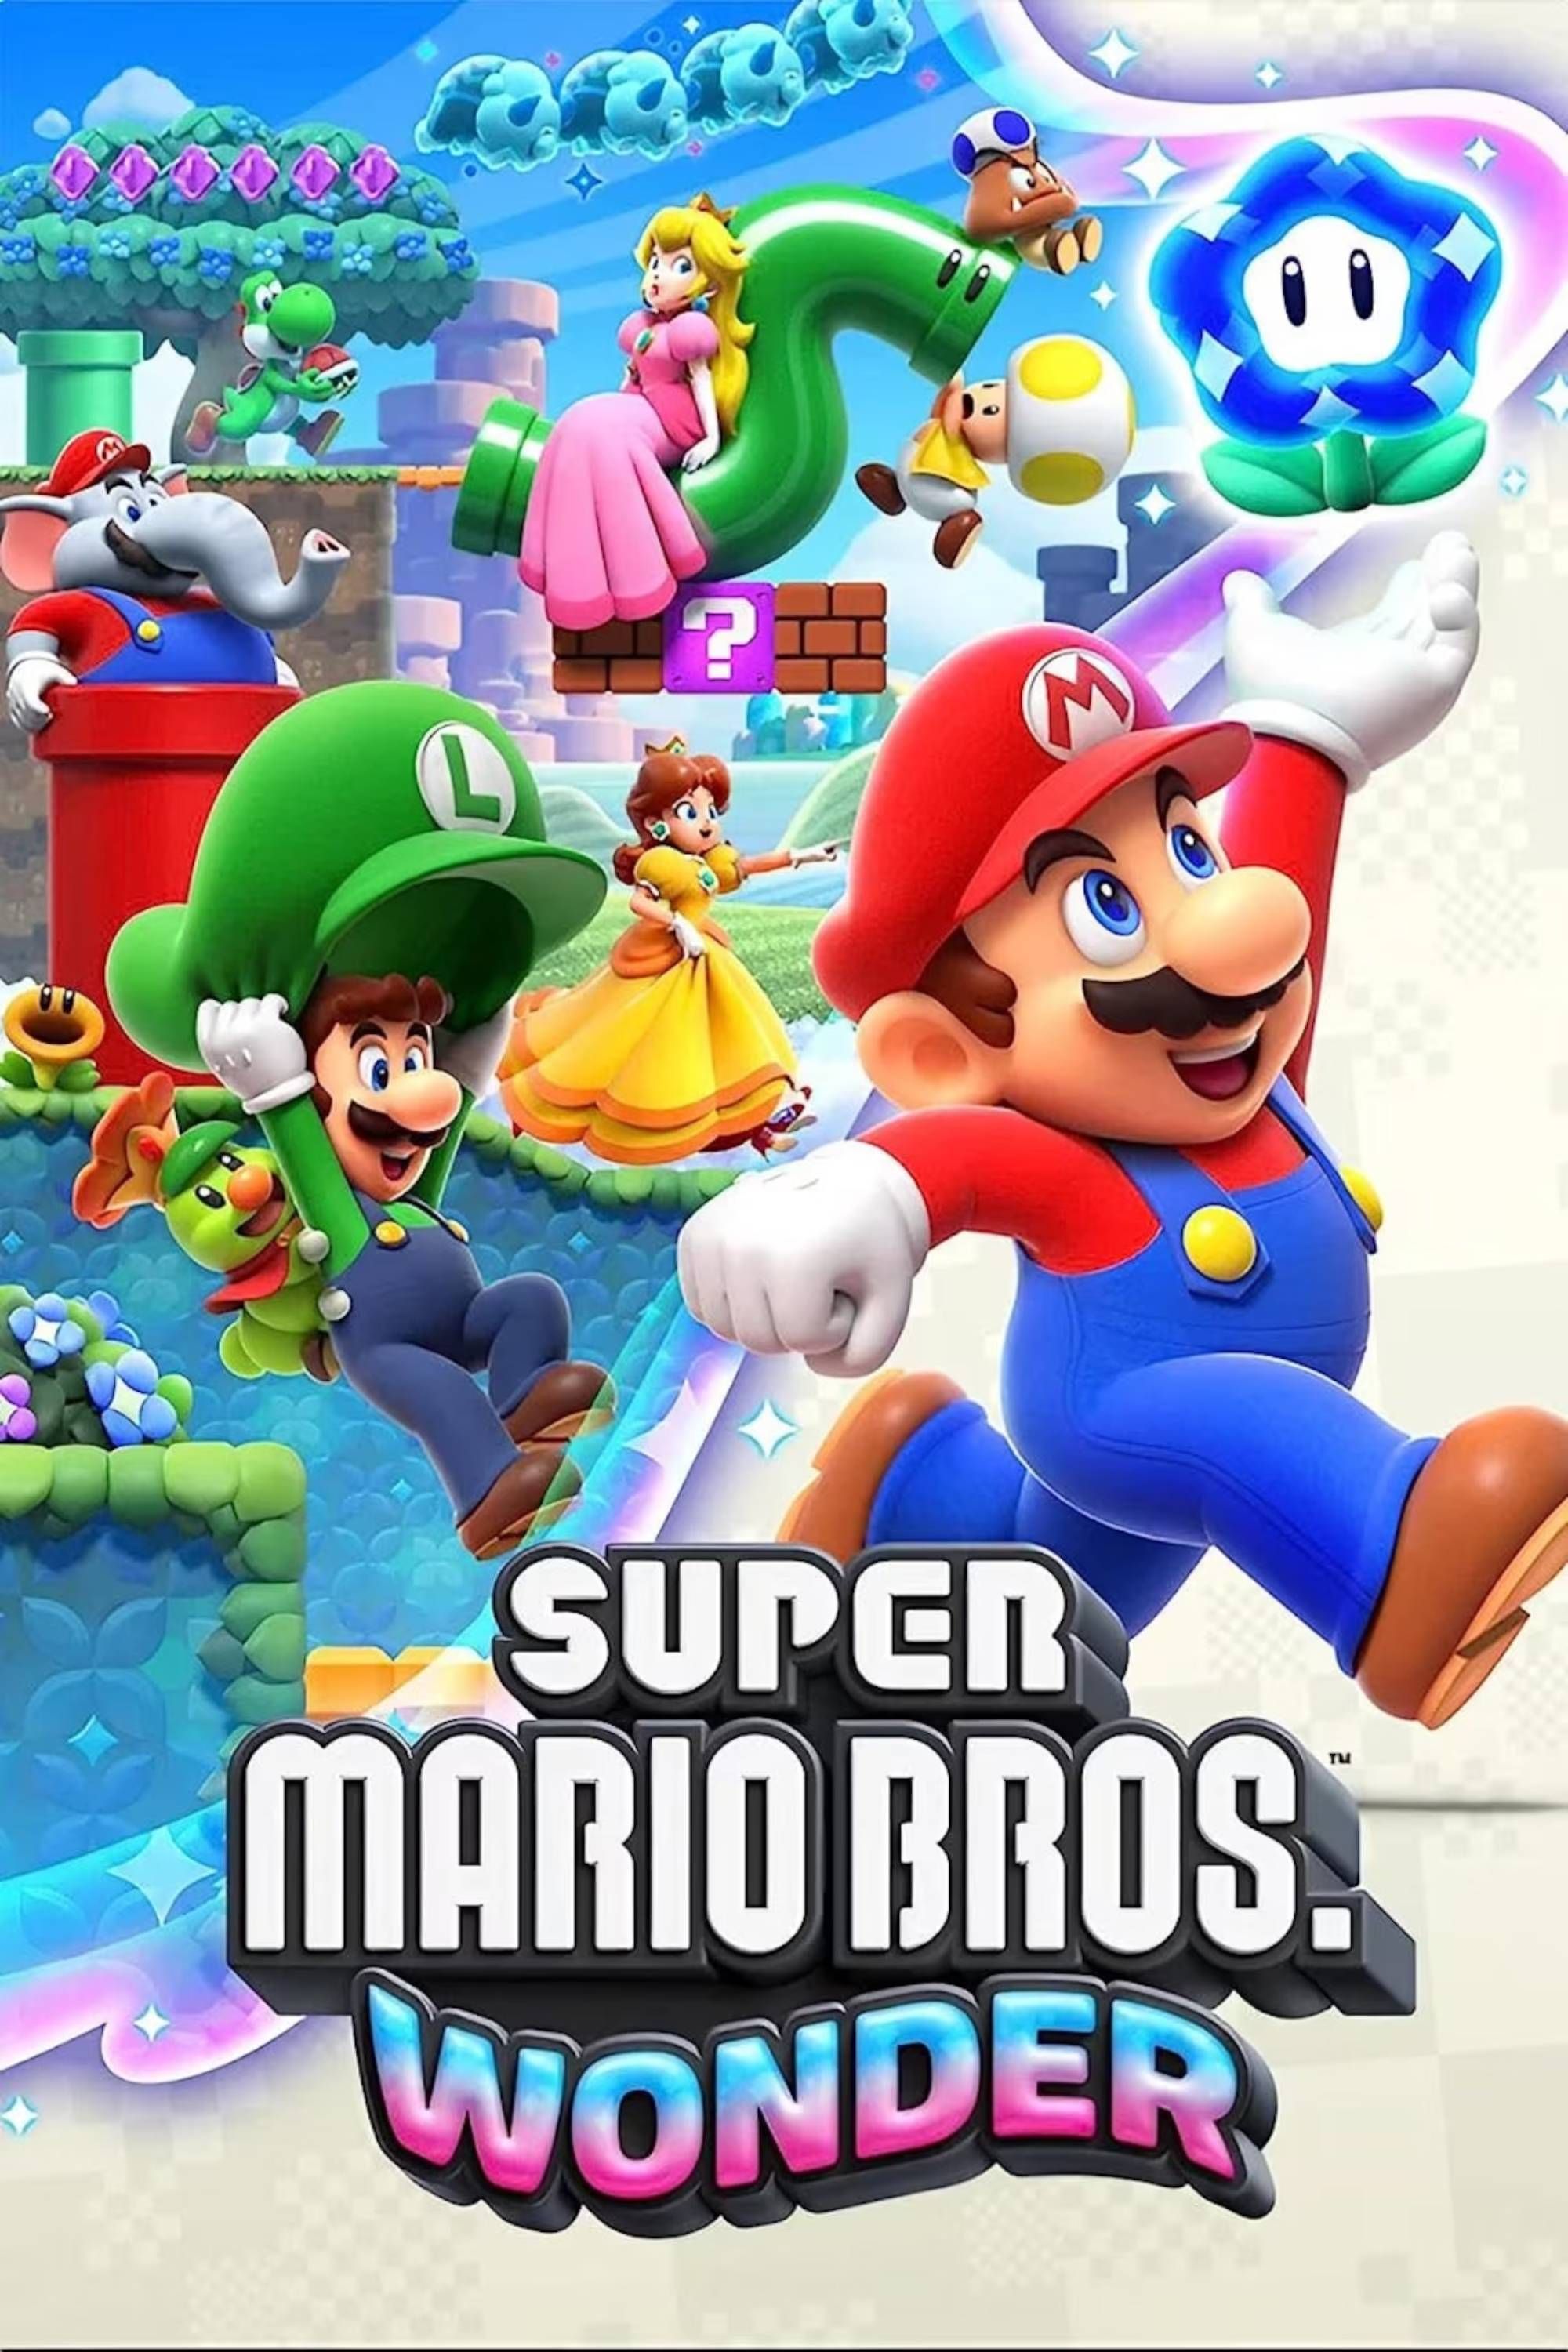 Is Super Mario Bros Wonder Multiplayer? Local and Online Co-op - N4G